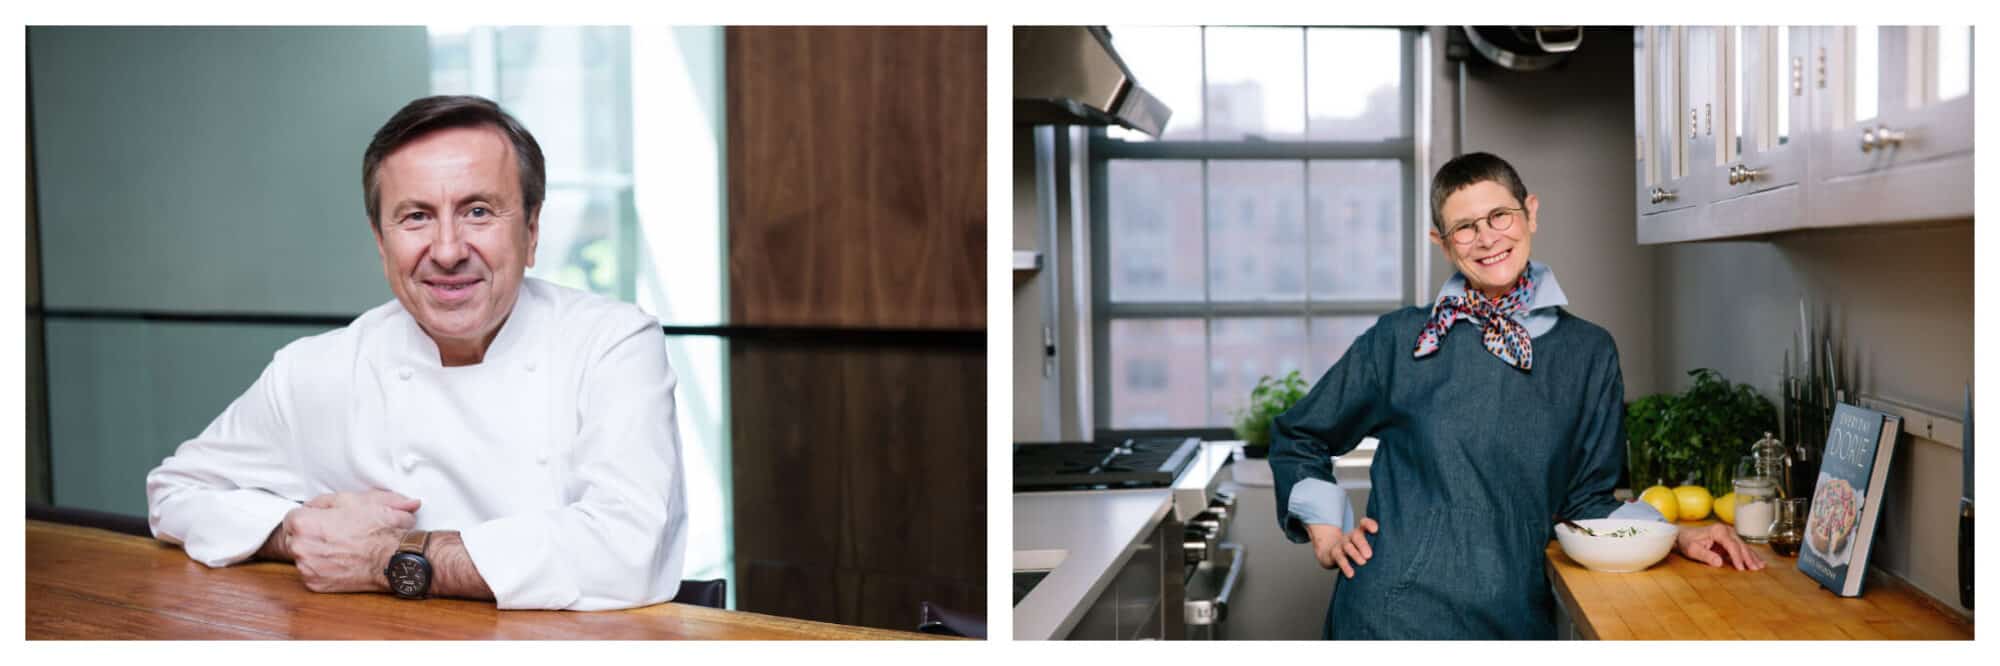 Left: A portrait of chef Daniel Boulud, wearing his chef's coat and smiling at the camera, Right: A portrait of Dorie Greenspan smiling in her New York City home kitchen